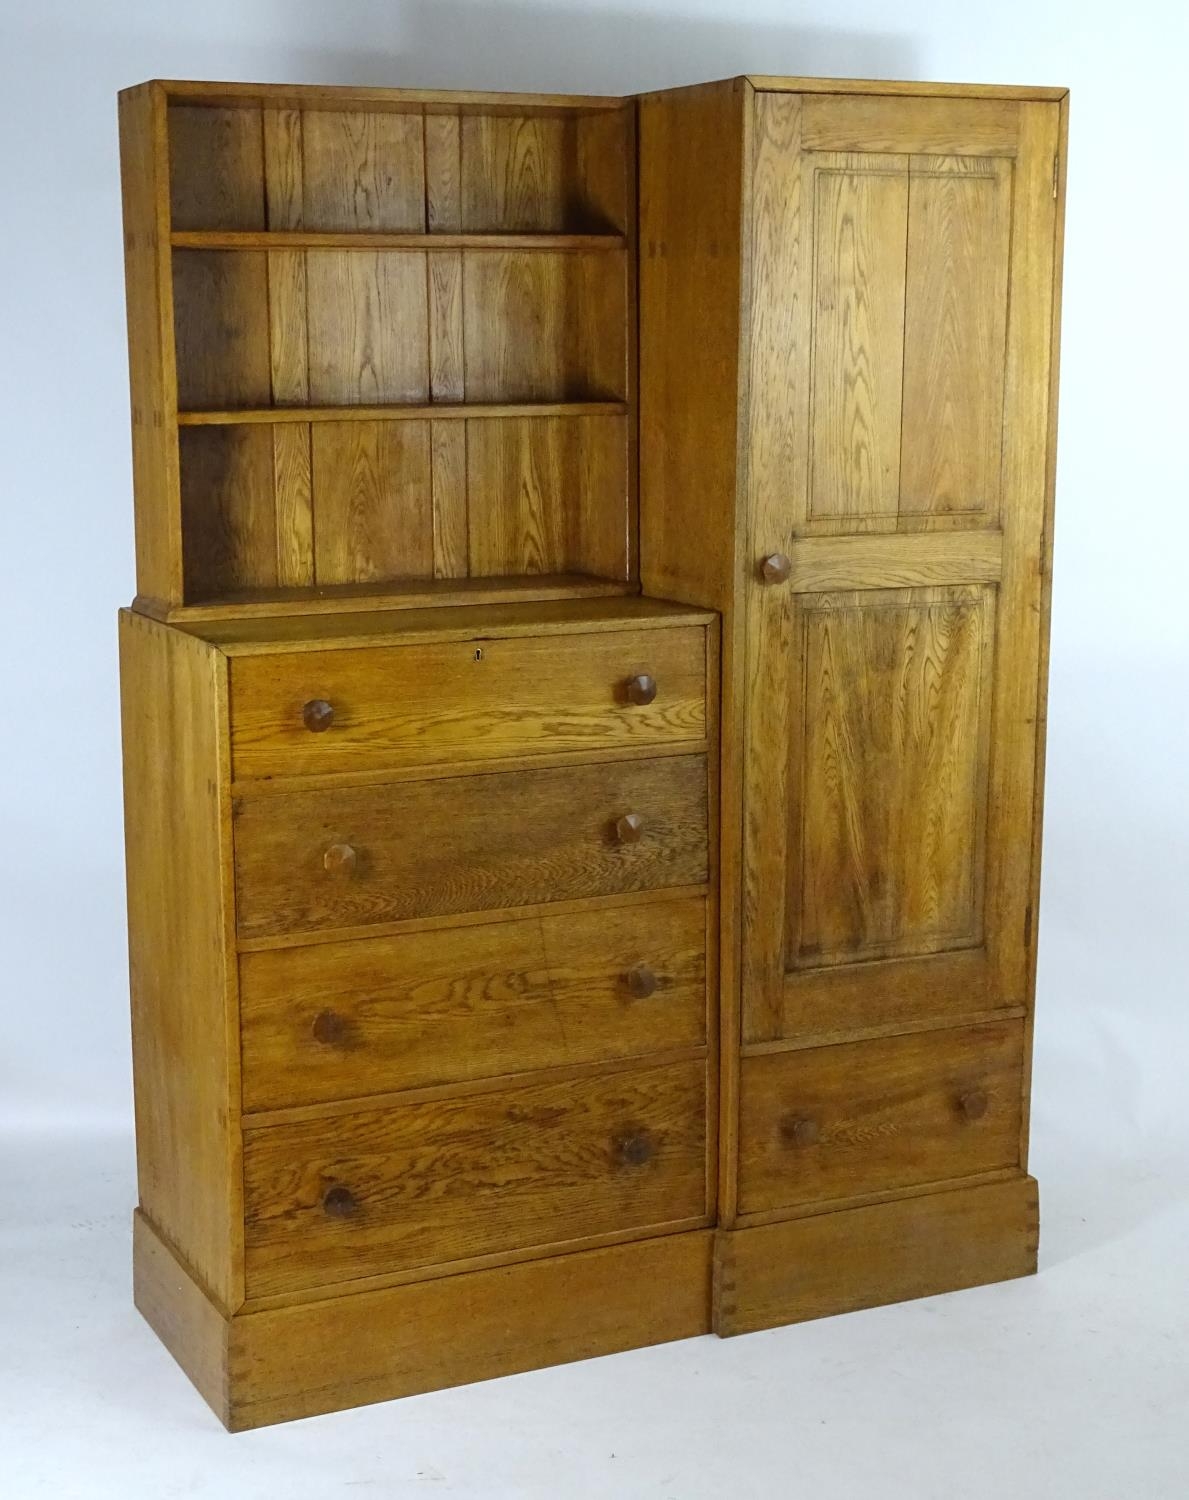 An early / mid 20thC oak combination wardrobe to a design by Peter Waals, Loughborough University.